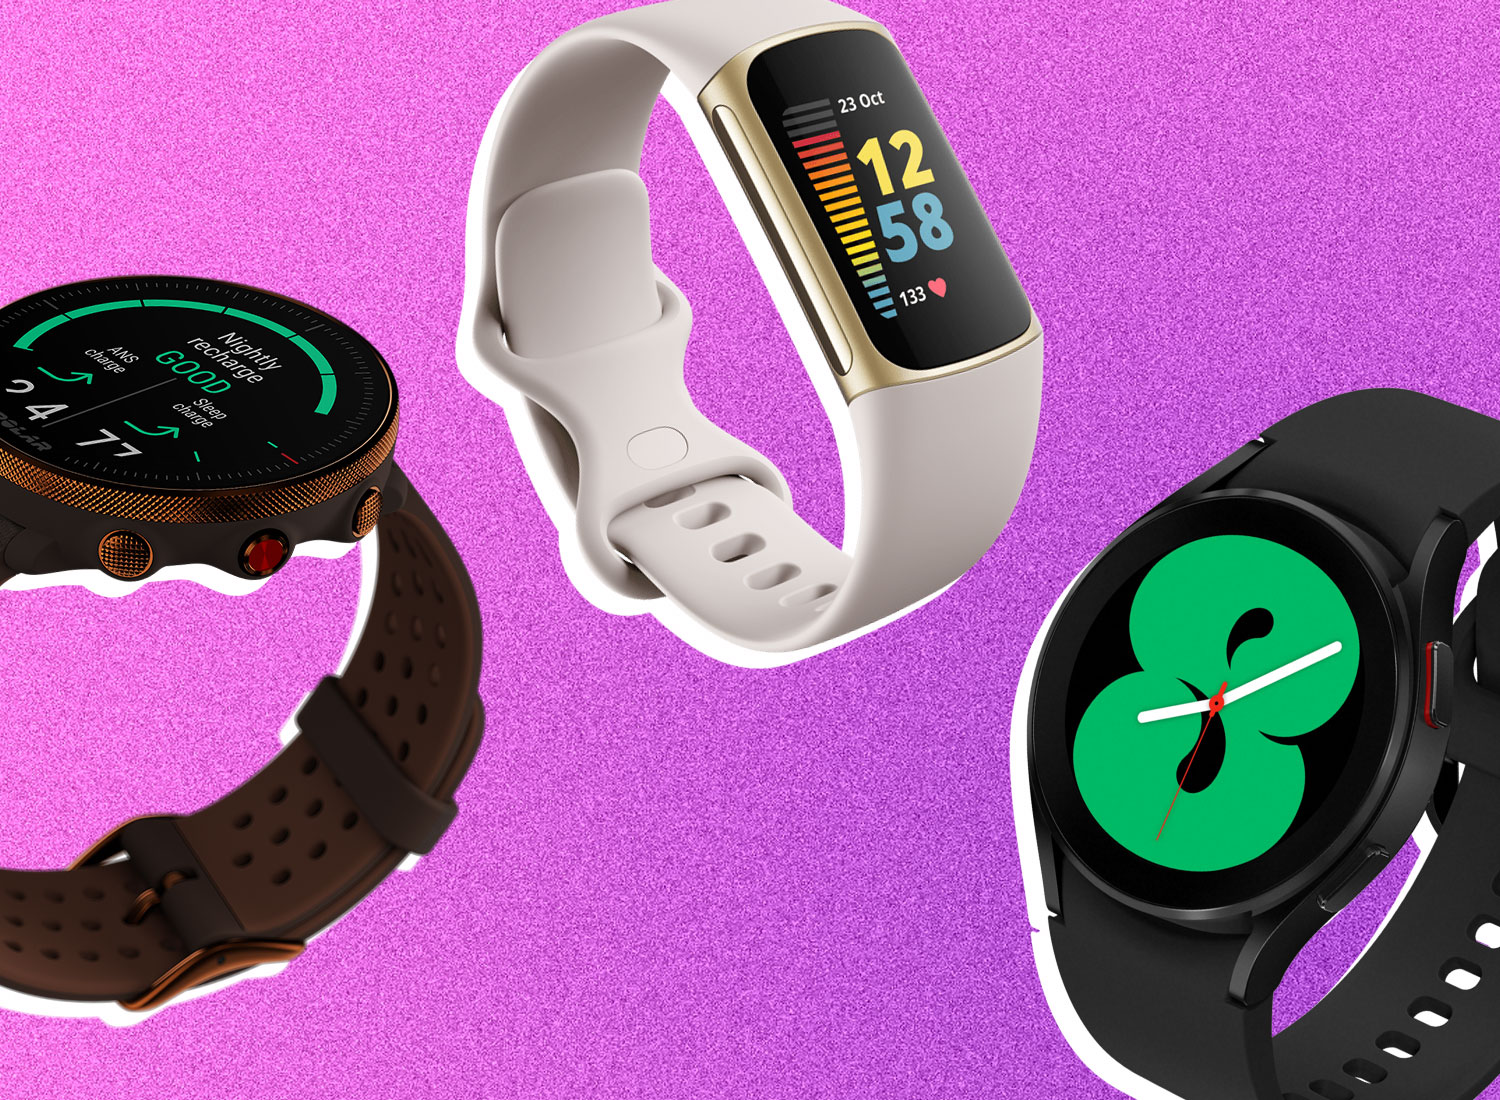 15 Best Fitness Watches For Smashing Your PBs